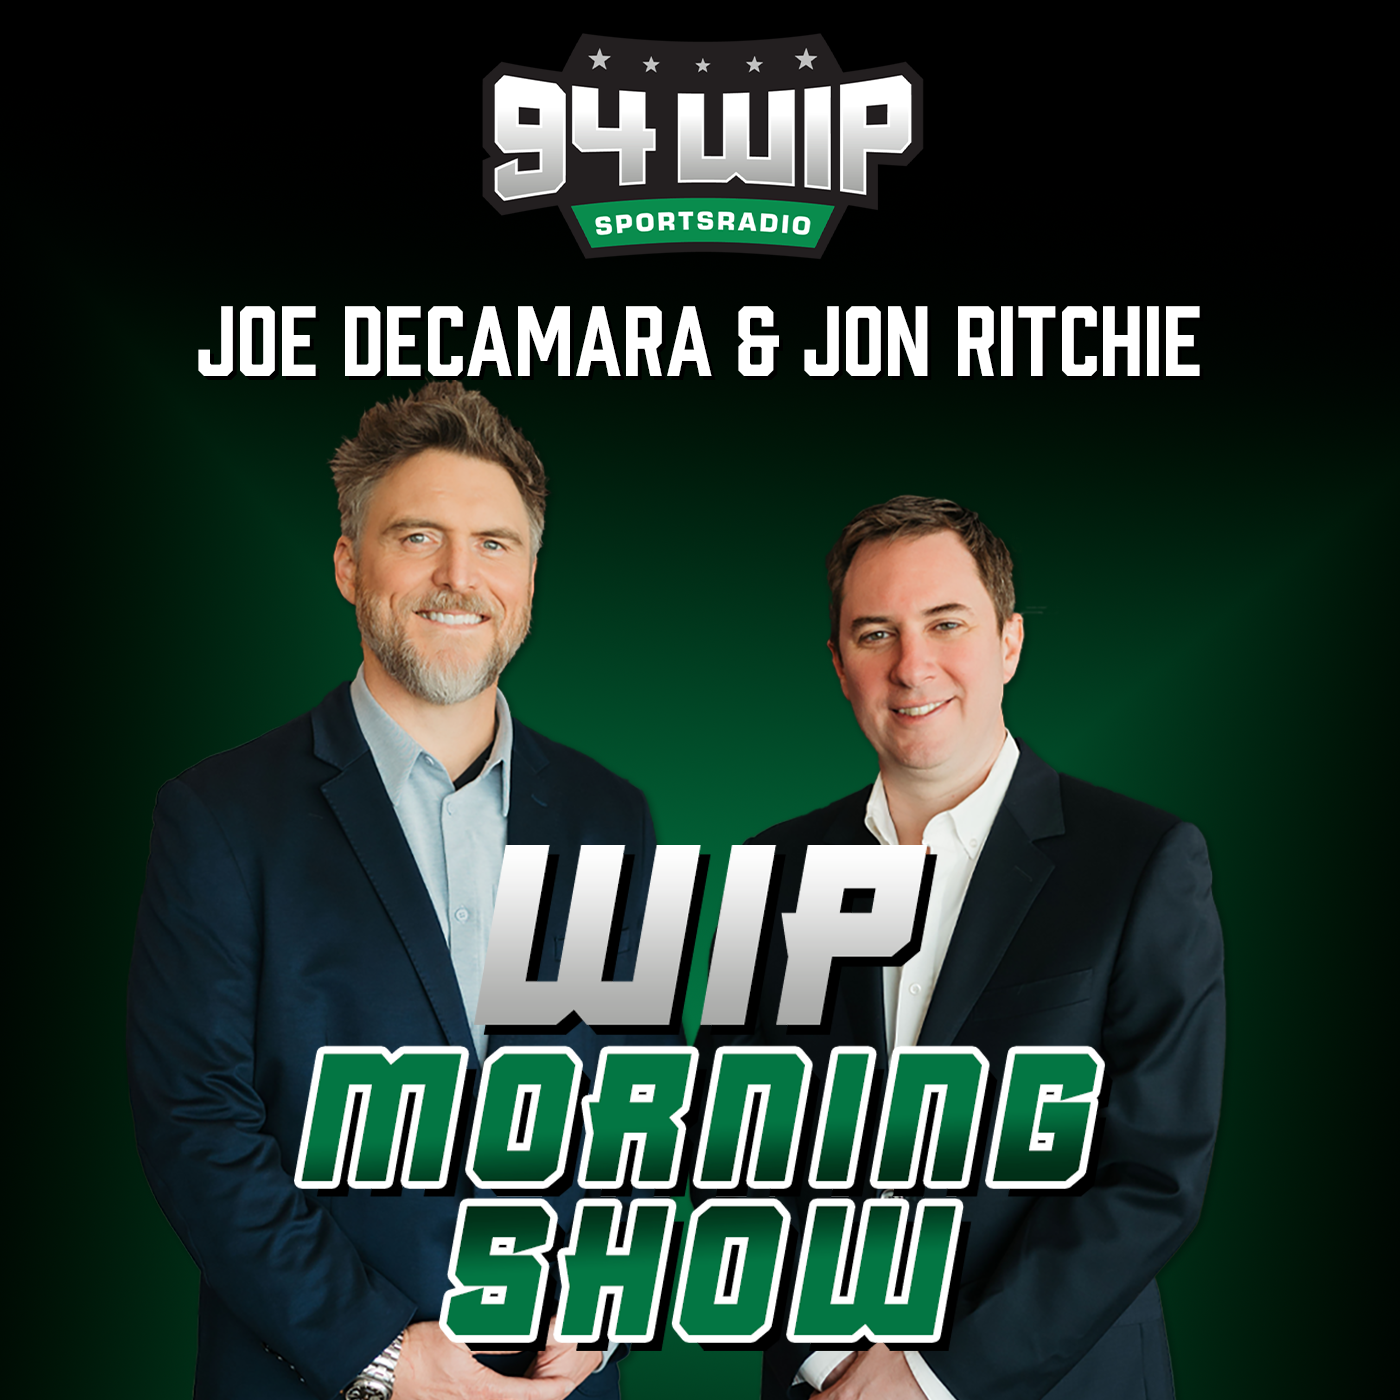 Cindy Webster on X: BEYOND psyched and so proud of Joe DeCamara, Jon  Ritchie & James Seltzer for taking over the @WIPMorningShow after  Angelo retires. It's a perfect choice by @SportsRadioWIP and